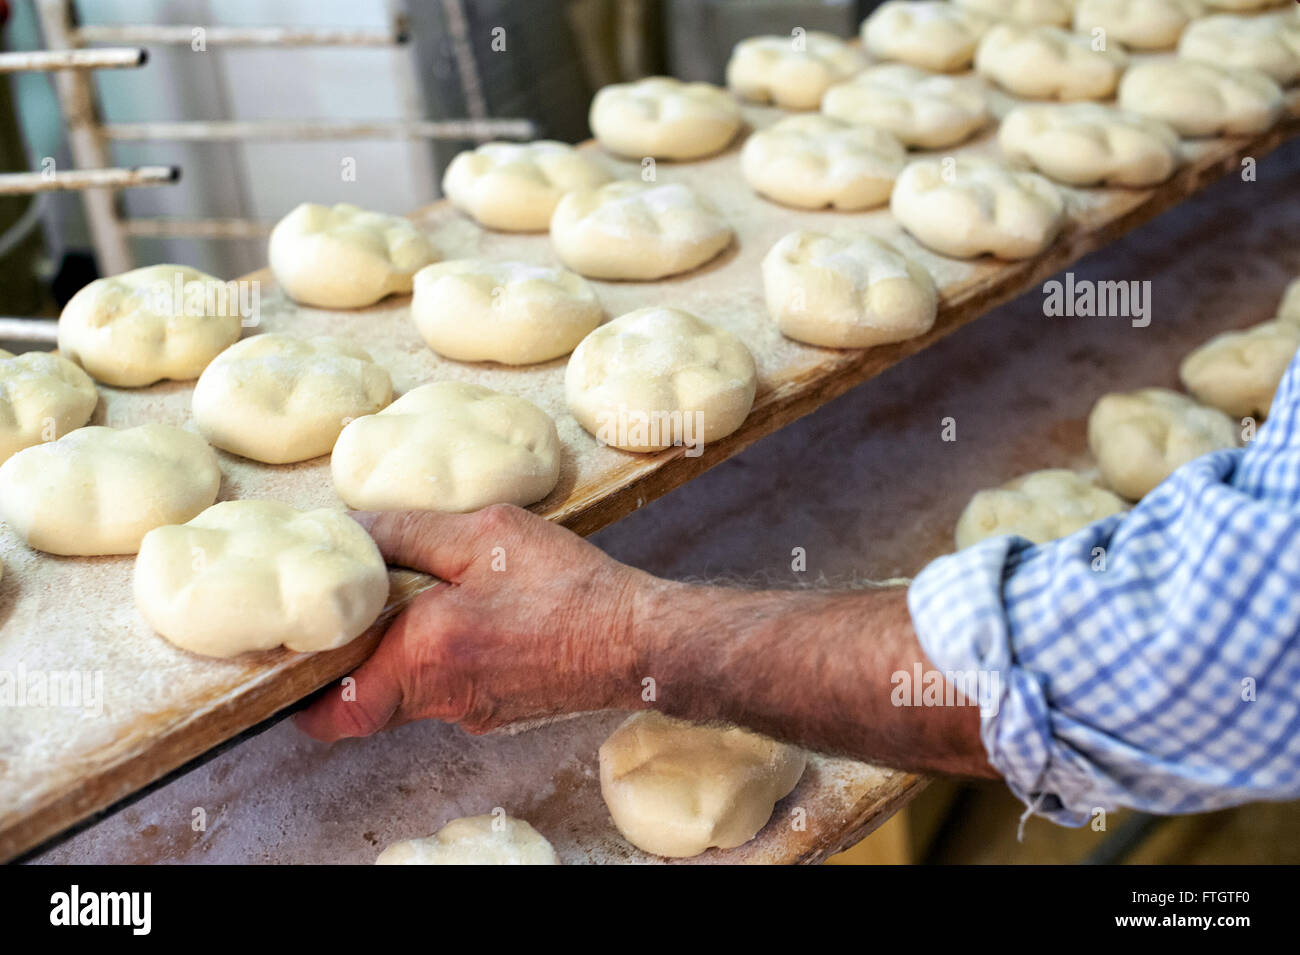 Baker placing a long tray with mounds of uncooked bread dough on a rack ready for baking in the oven, close up of his hand Stock Photo